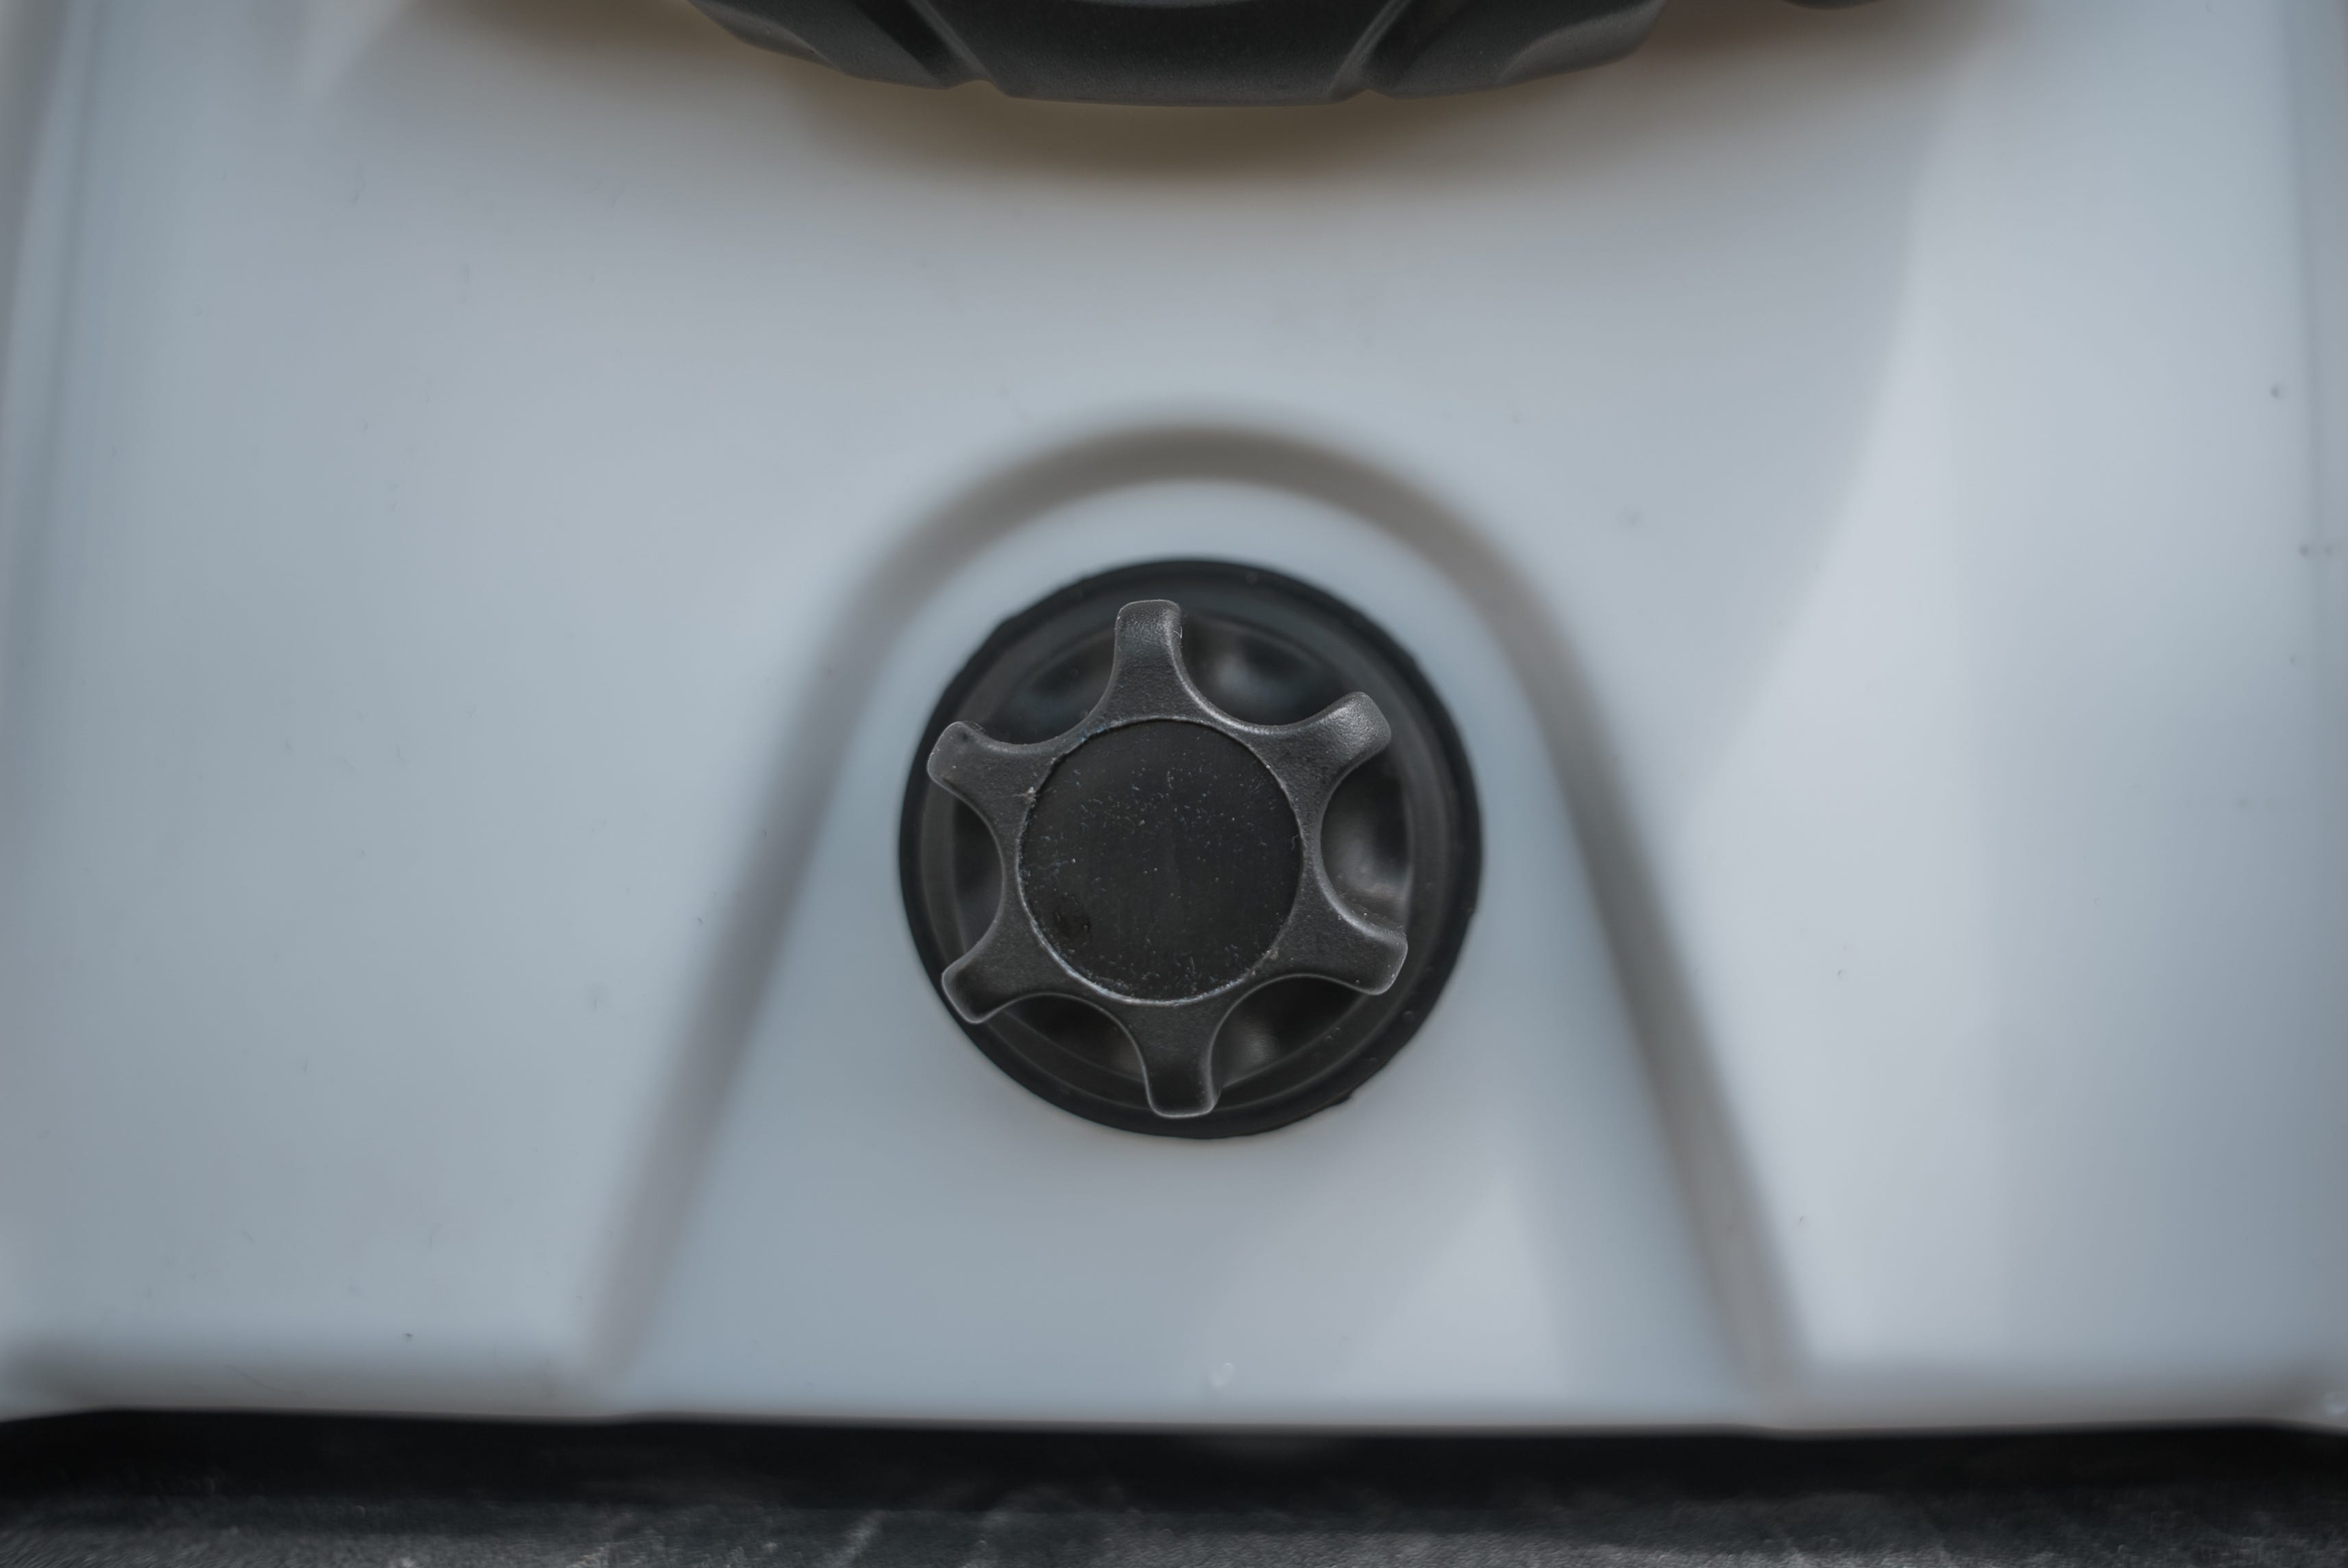 The drain plug on the Outdoor Revival cooler